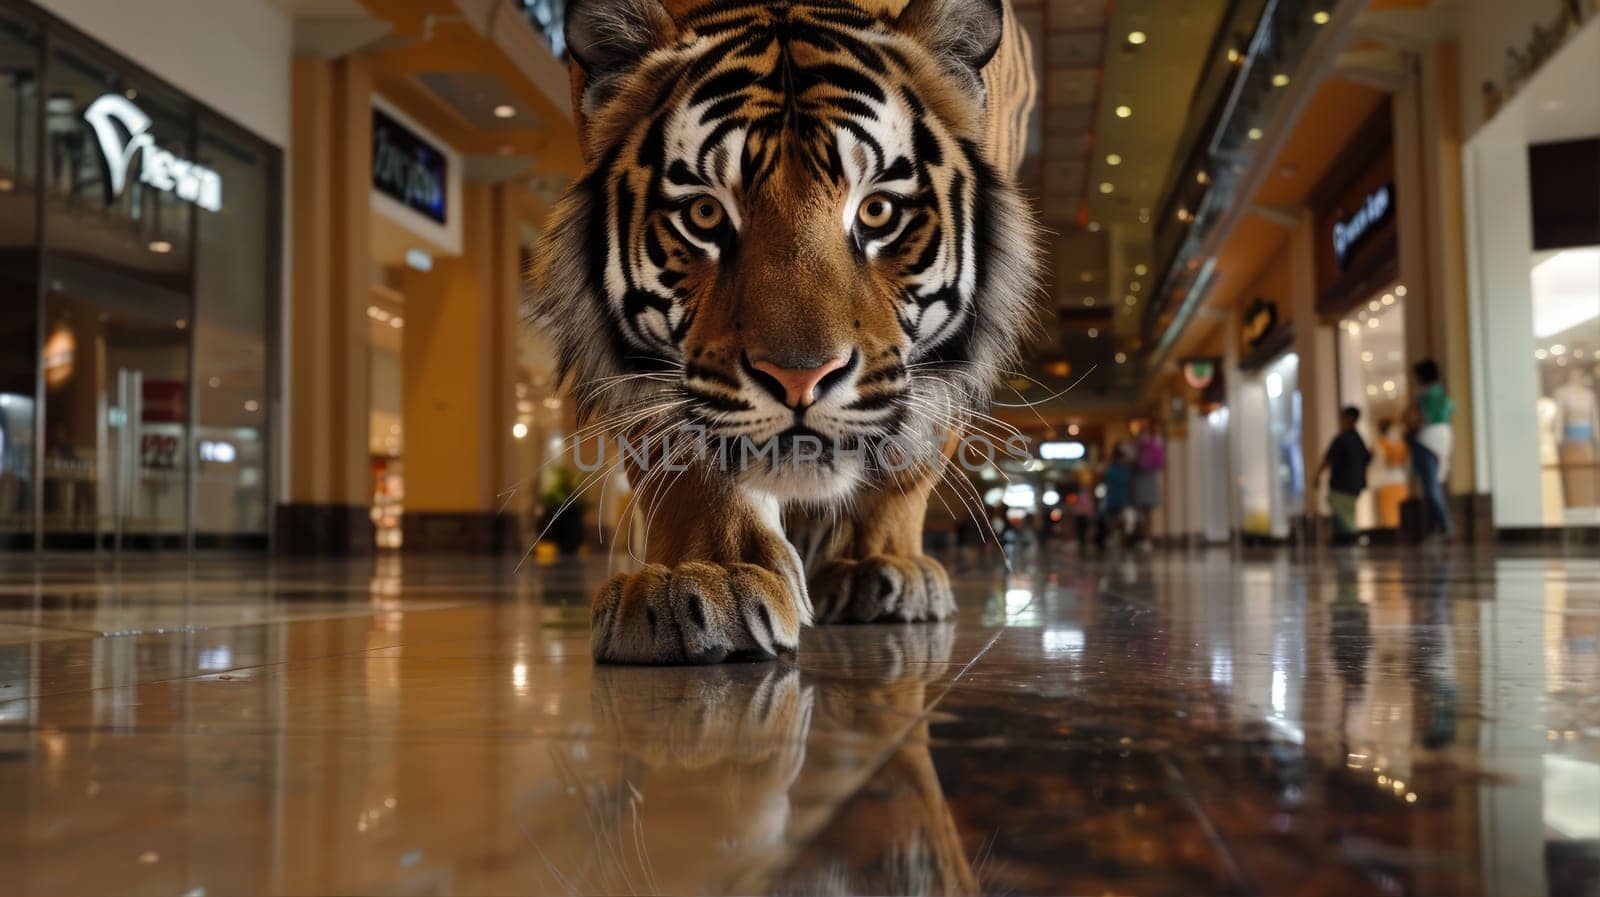 Bengal tiger with whiskers roaming mall by natali_brill